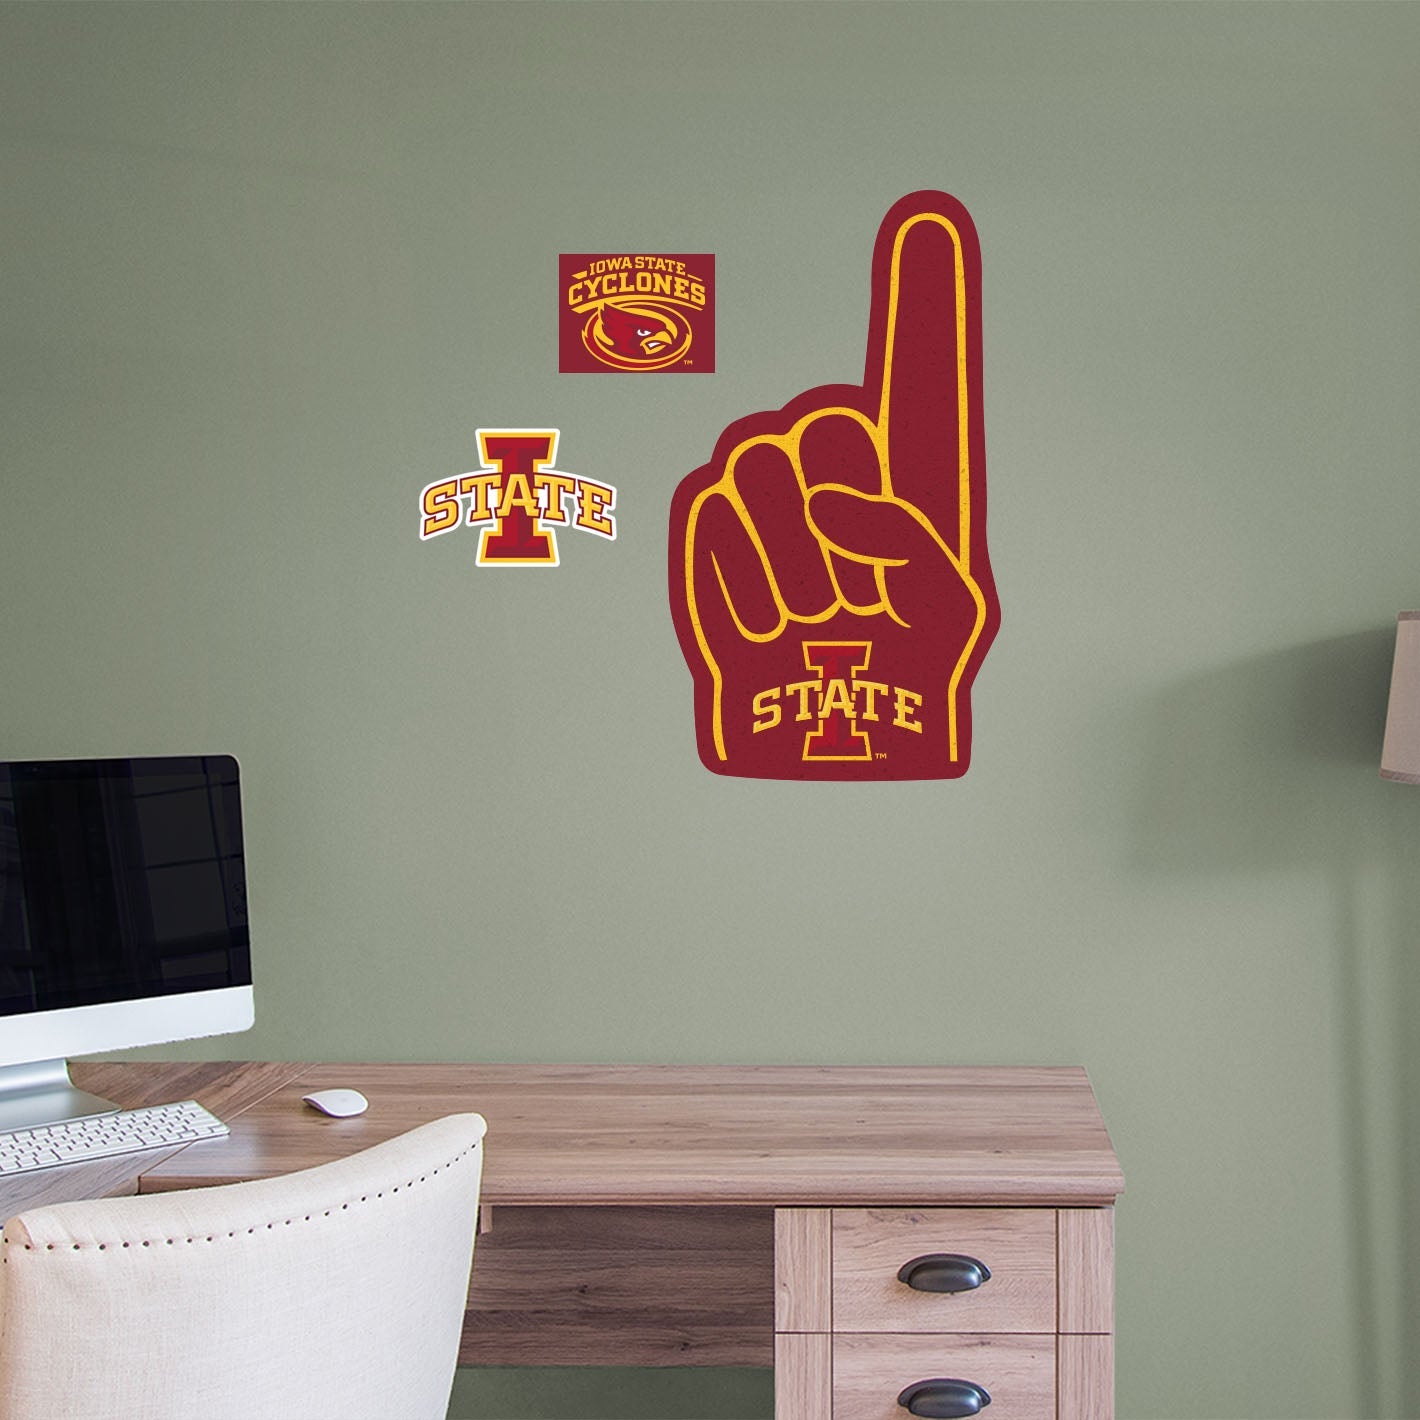 Iowa State Cyclones: Foam Finger - Officially Licensed NCAA Removable Adhesive Decal